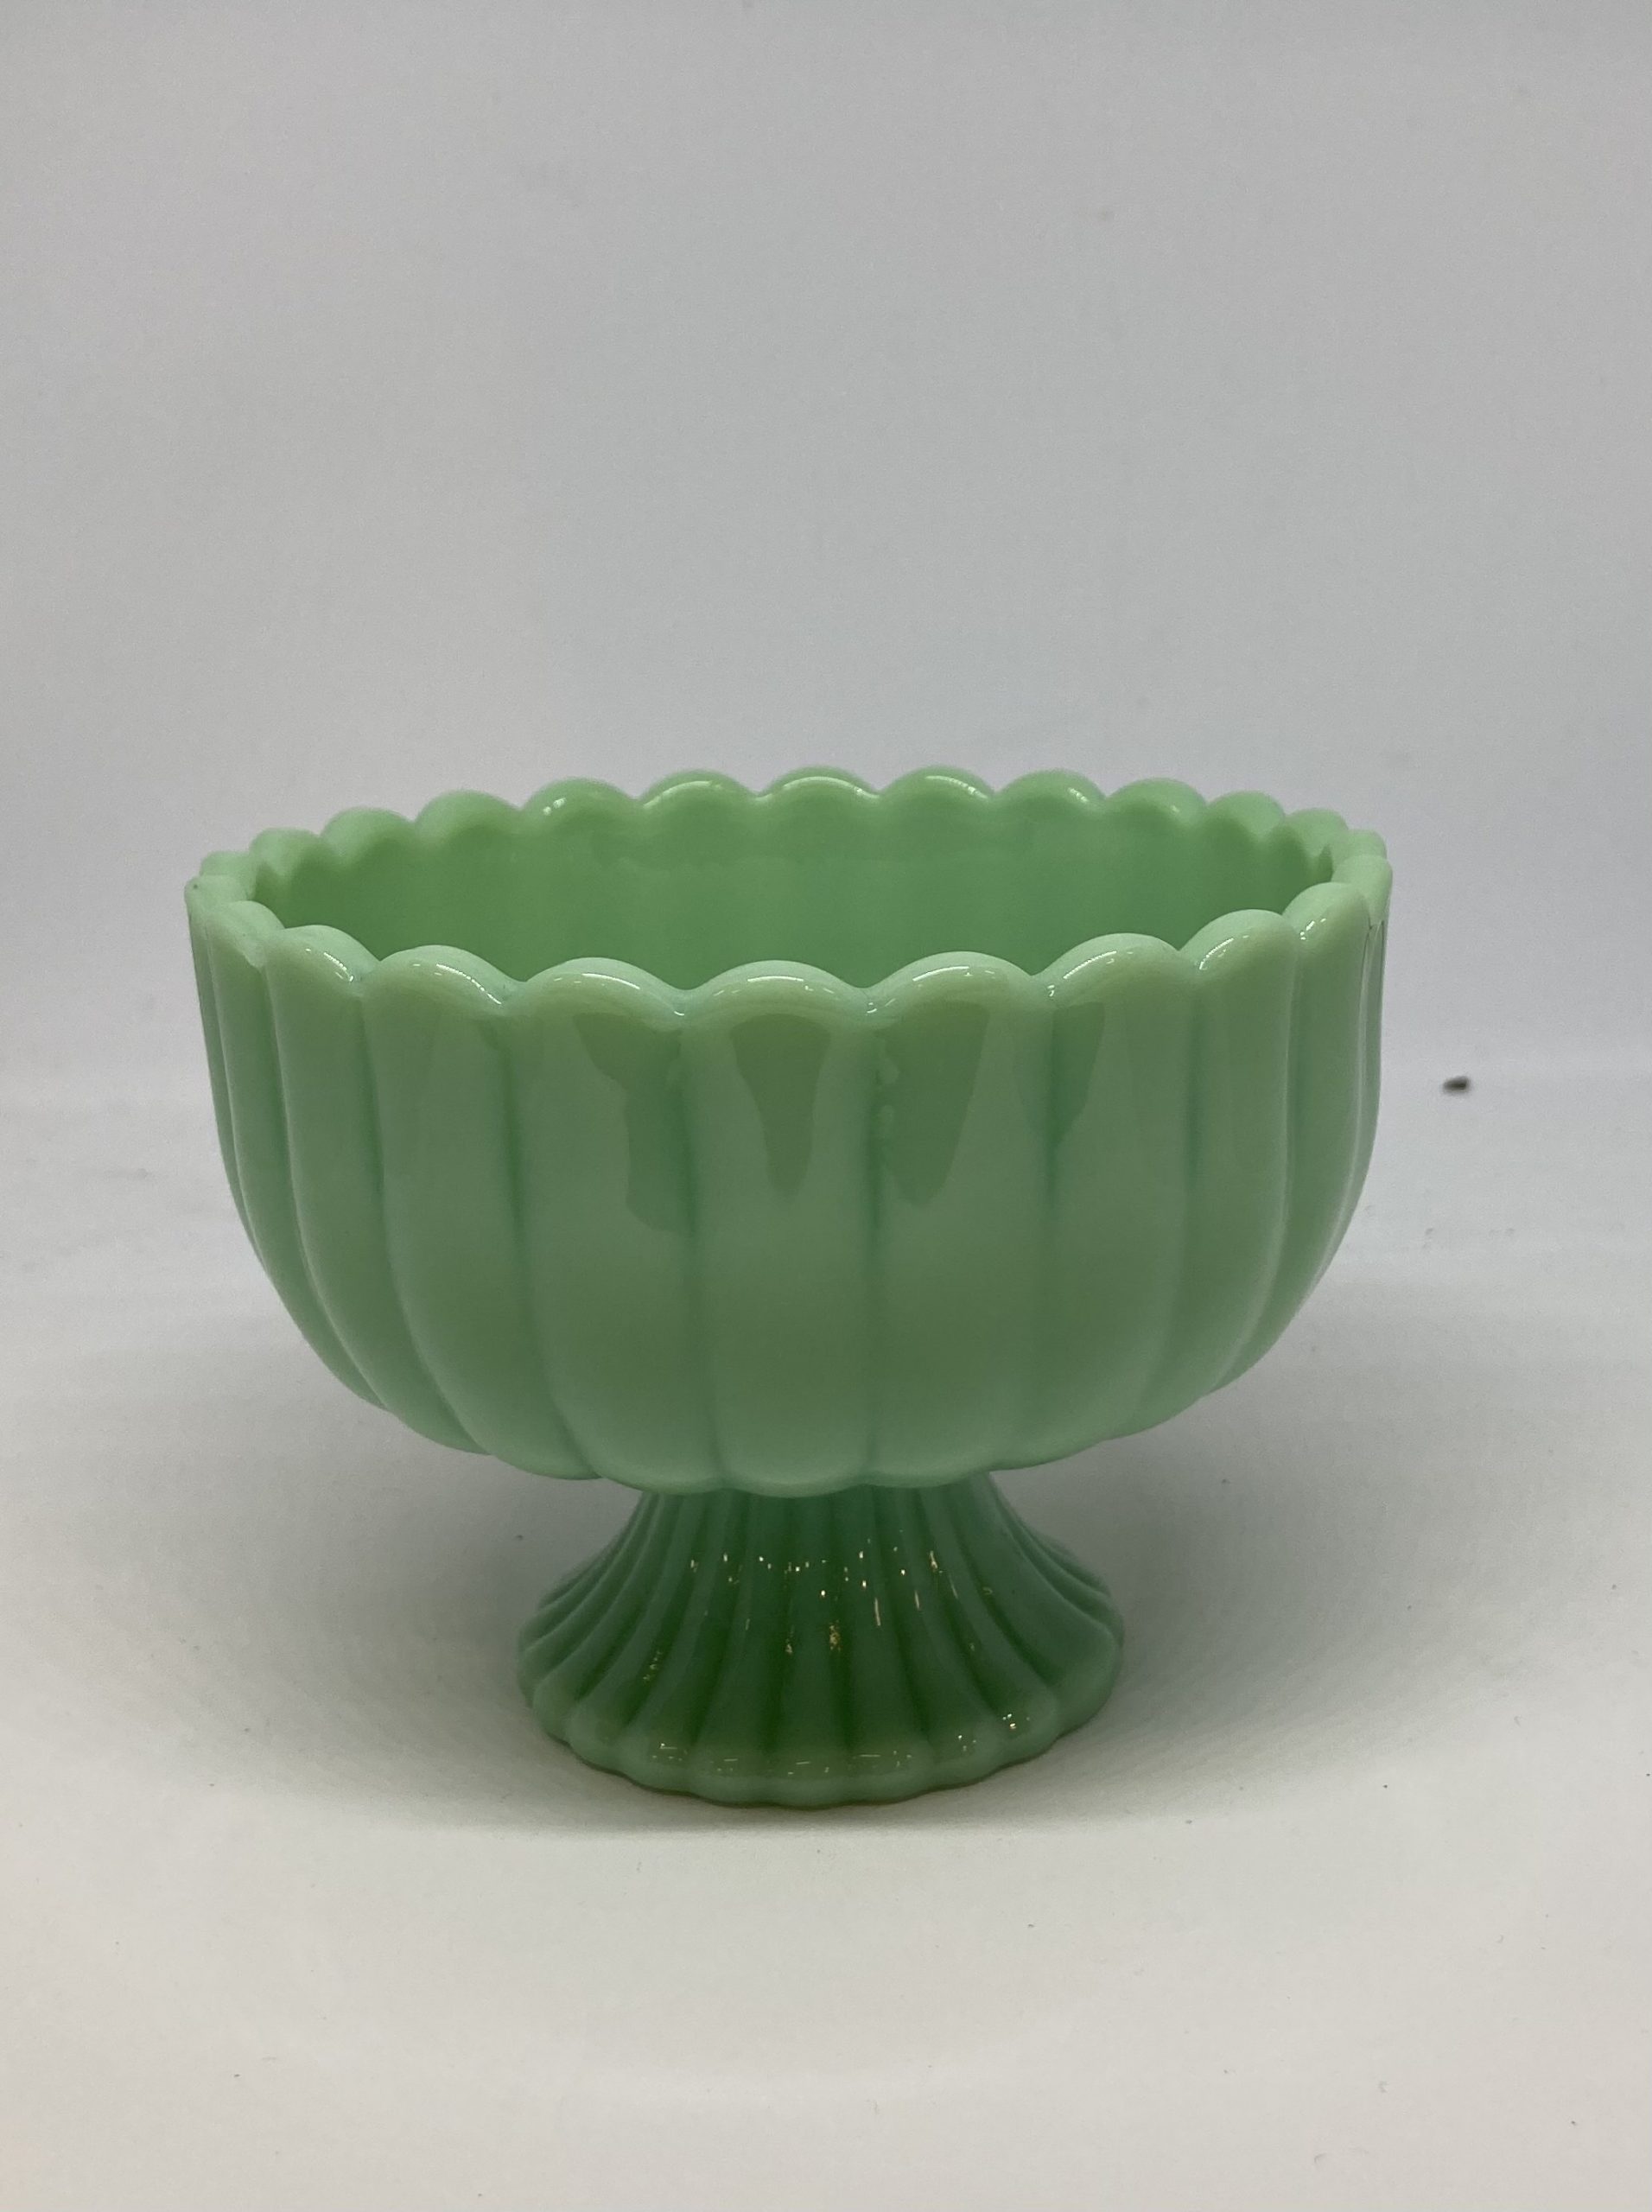 https://tallulahpoint.net/wp-content/uploads/2020/12/jadeite-candy-bowl-scaled.jpg